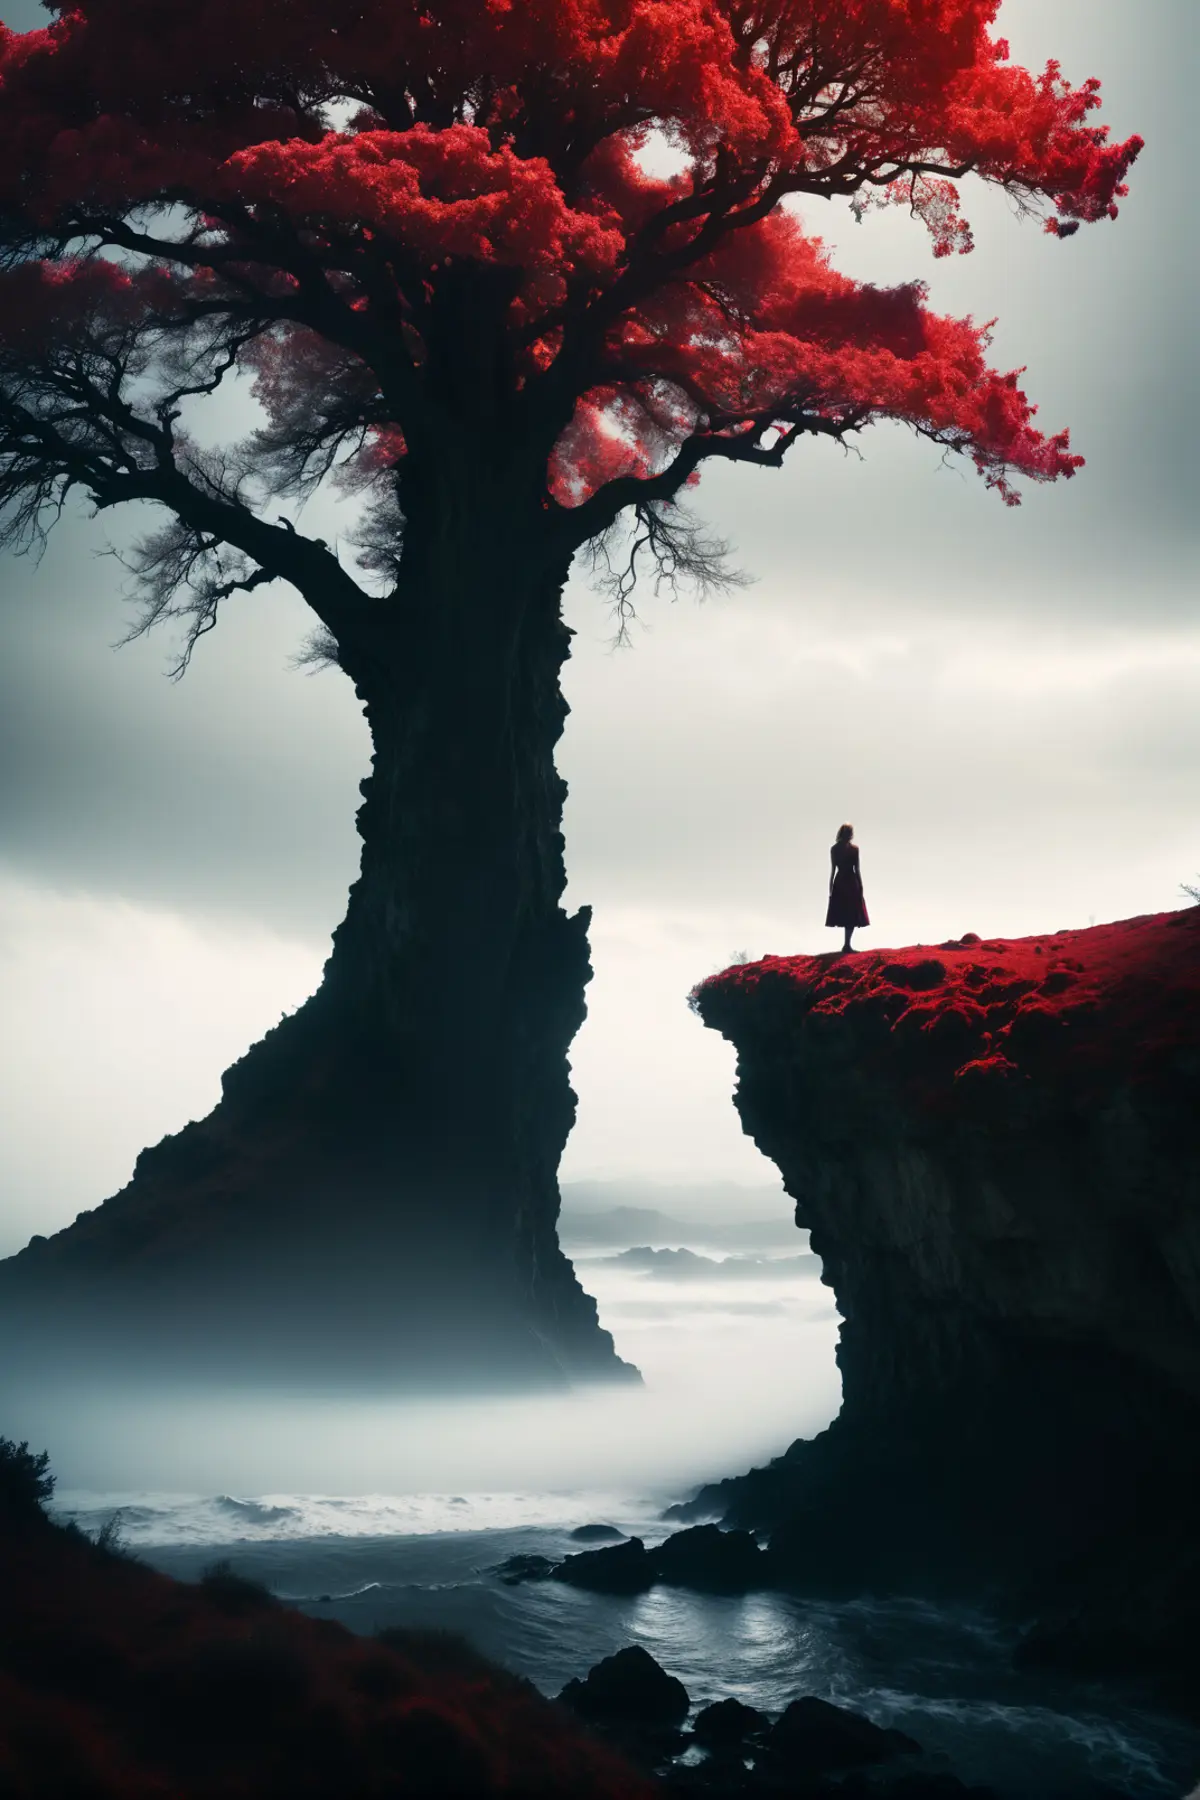 A lone figure standing on the edge of a cliff overlooking a misty seascape. Above them towers an imposing tree with vibrant red foliage that contrasts starkly against the surrounding subdued tones. 